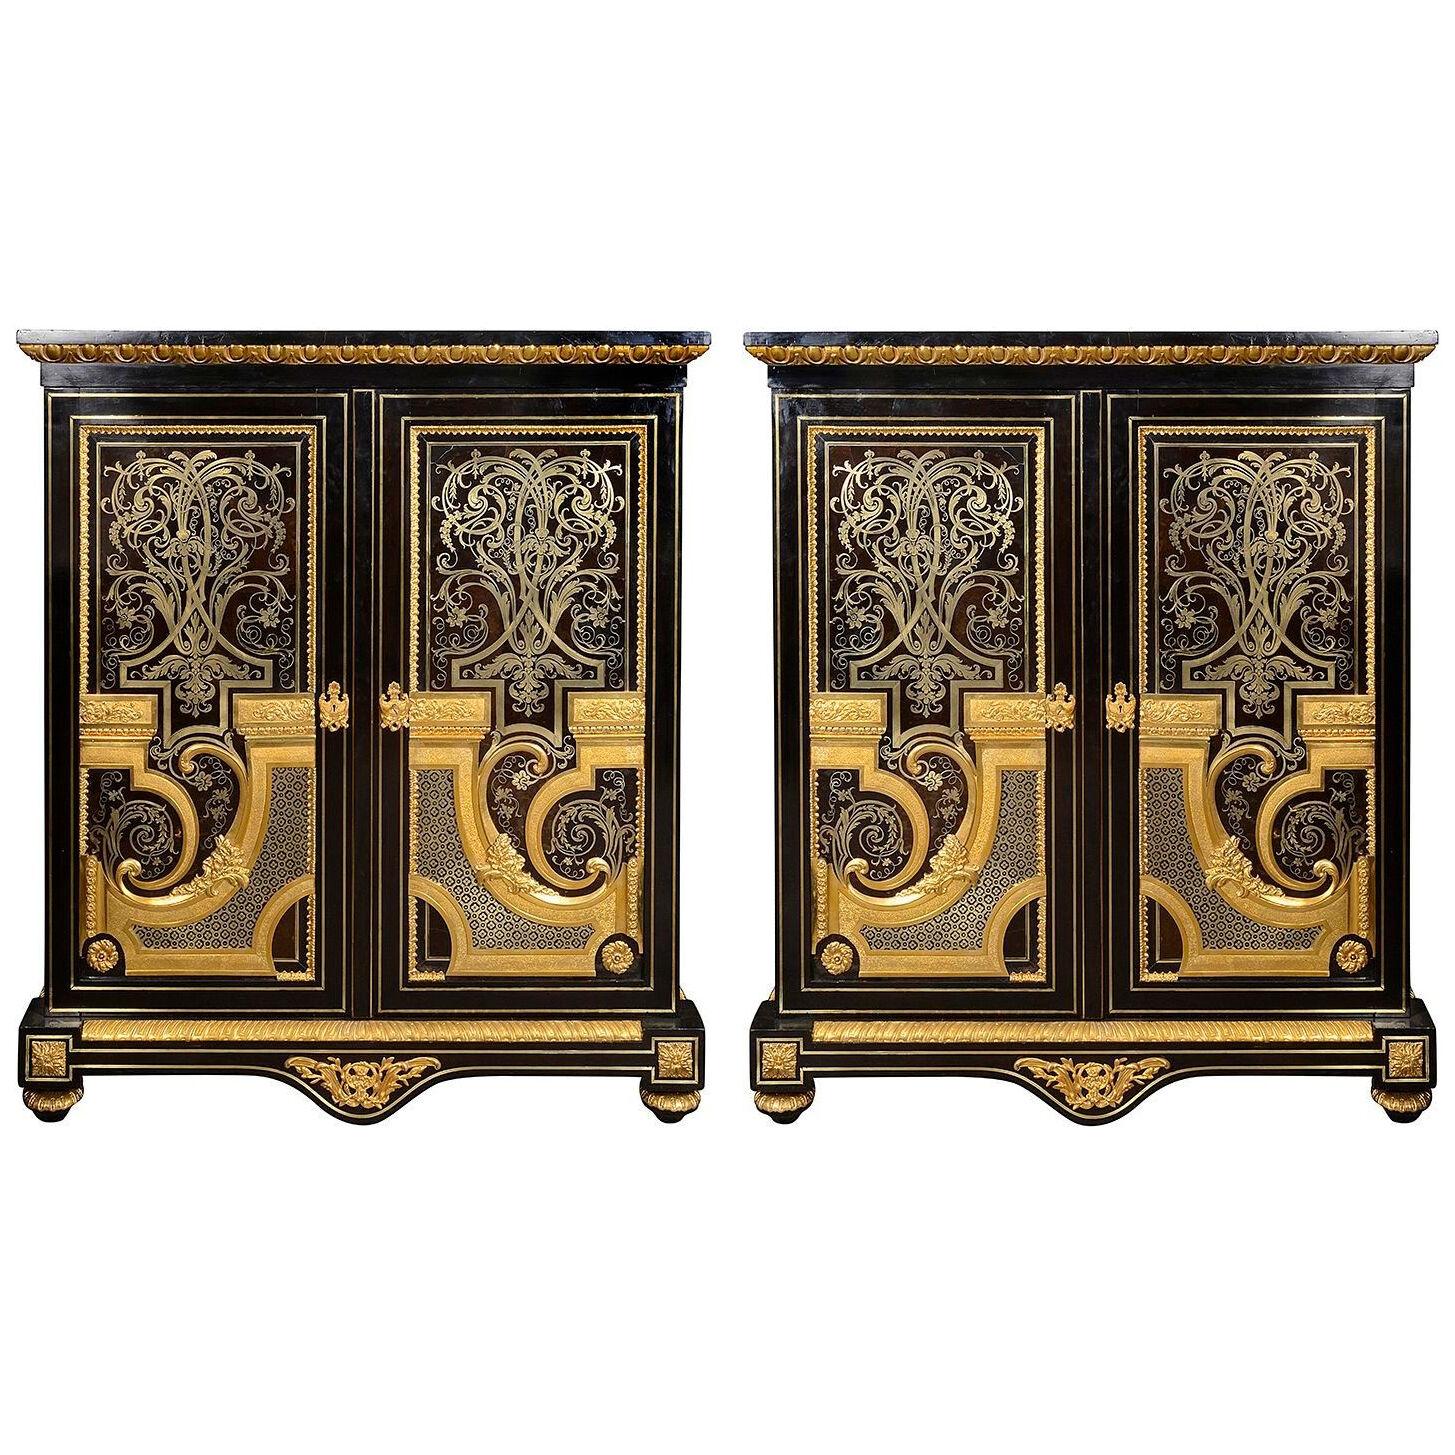 A fine pair of Napolian III boulle side cabinets, circa 1860